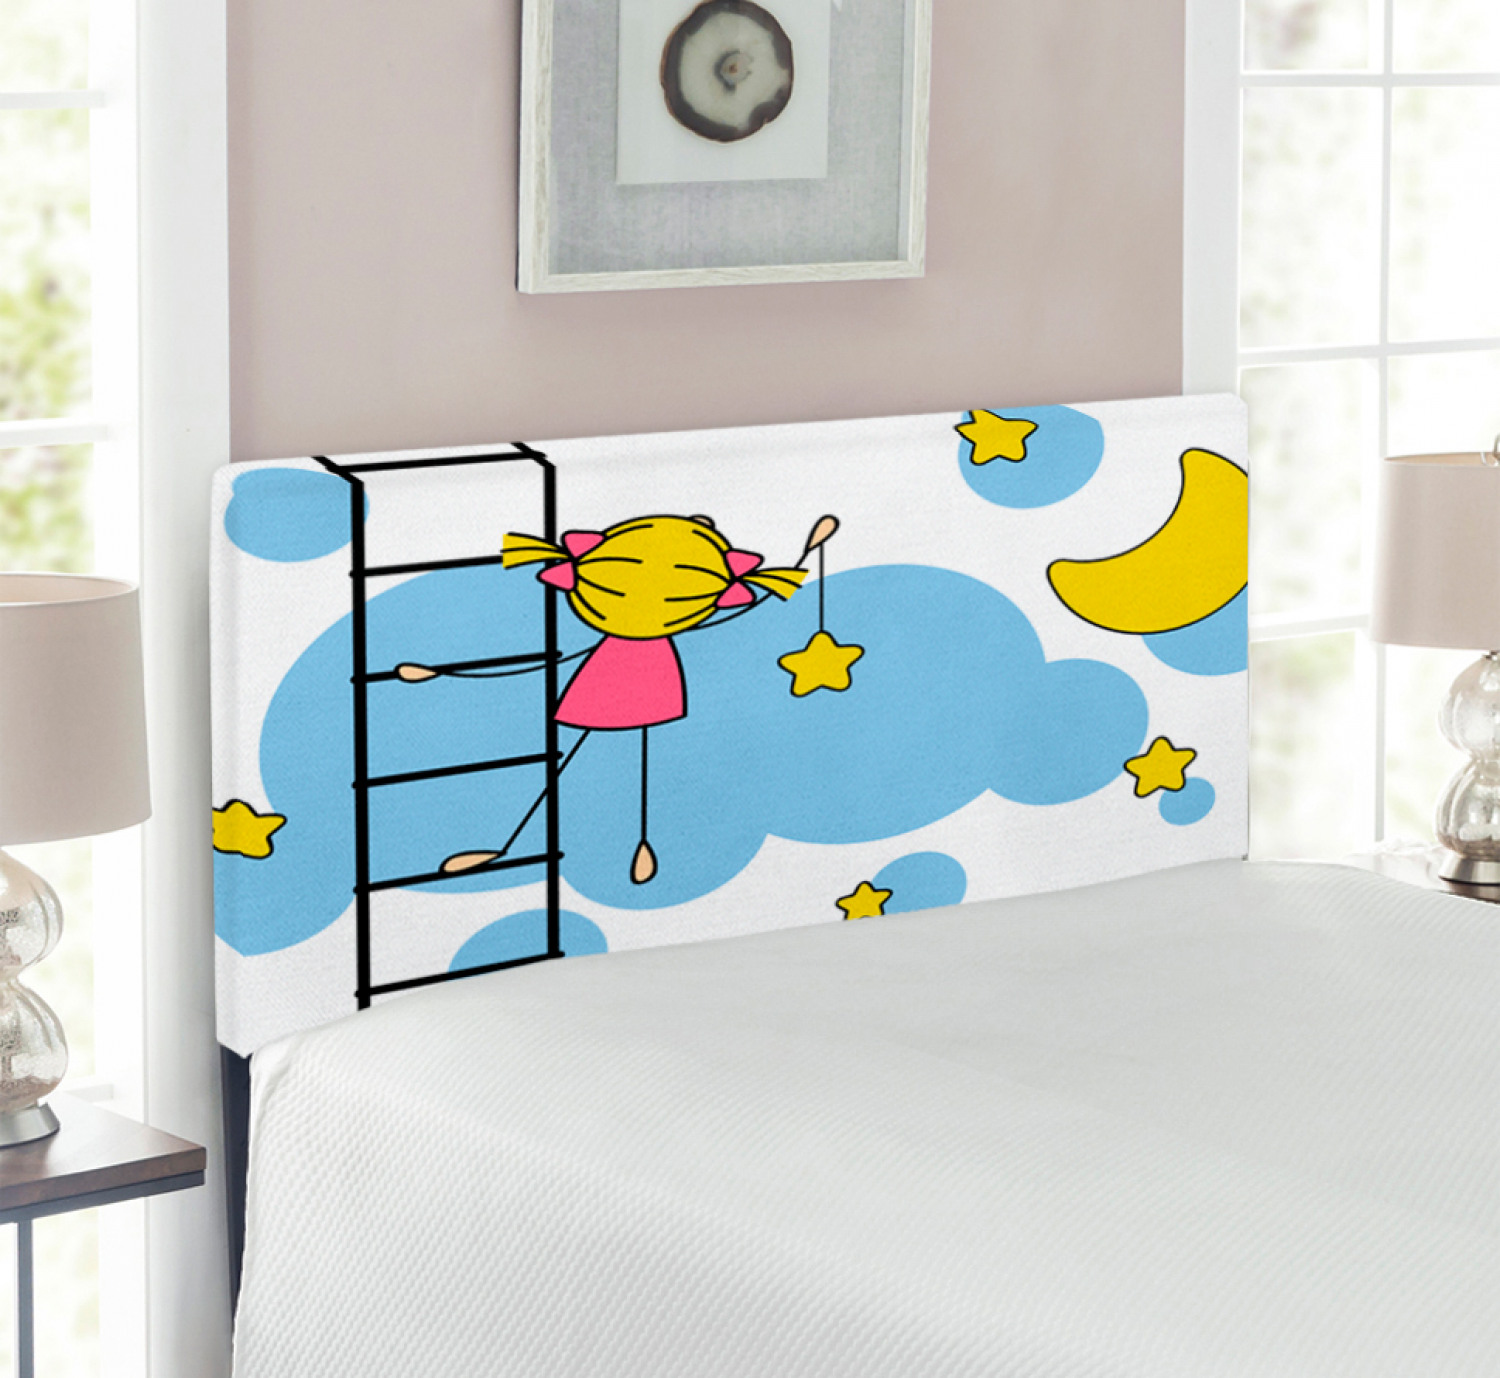 Star Headboard, Girl on Ladder Hanging a Star in the Night Sky with Half Moon Cartoon Picture, Upholstered Decorative Metal Bed Headboard with Memory Foam, Twin Size, Yellow Blue, by Ambesonne - image 2 of 4